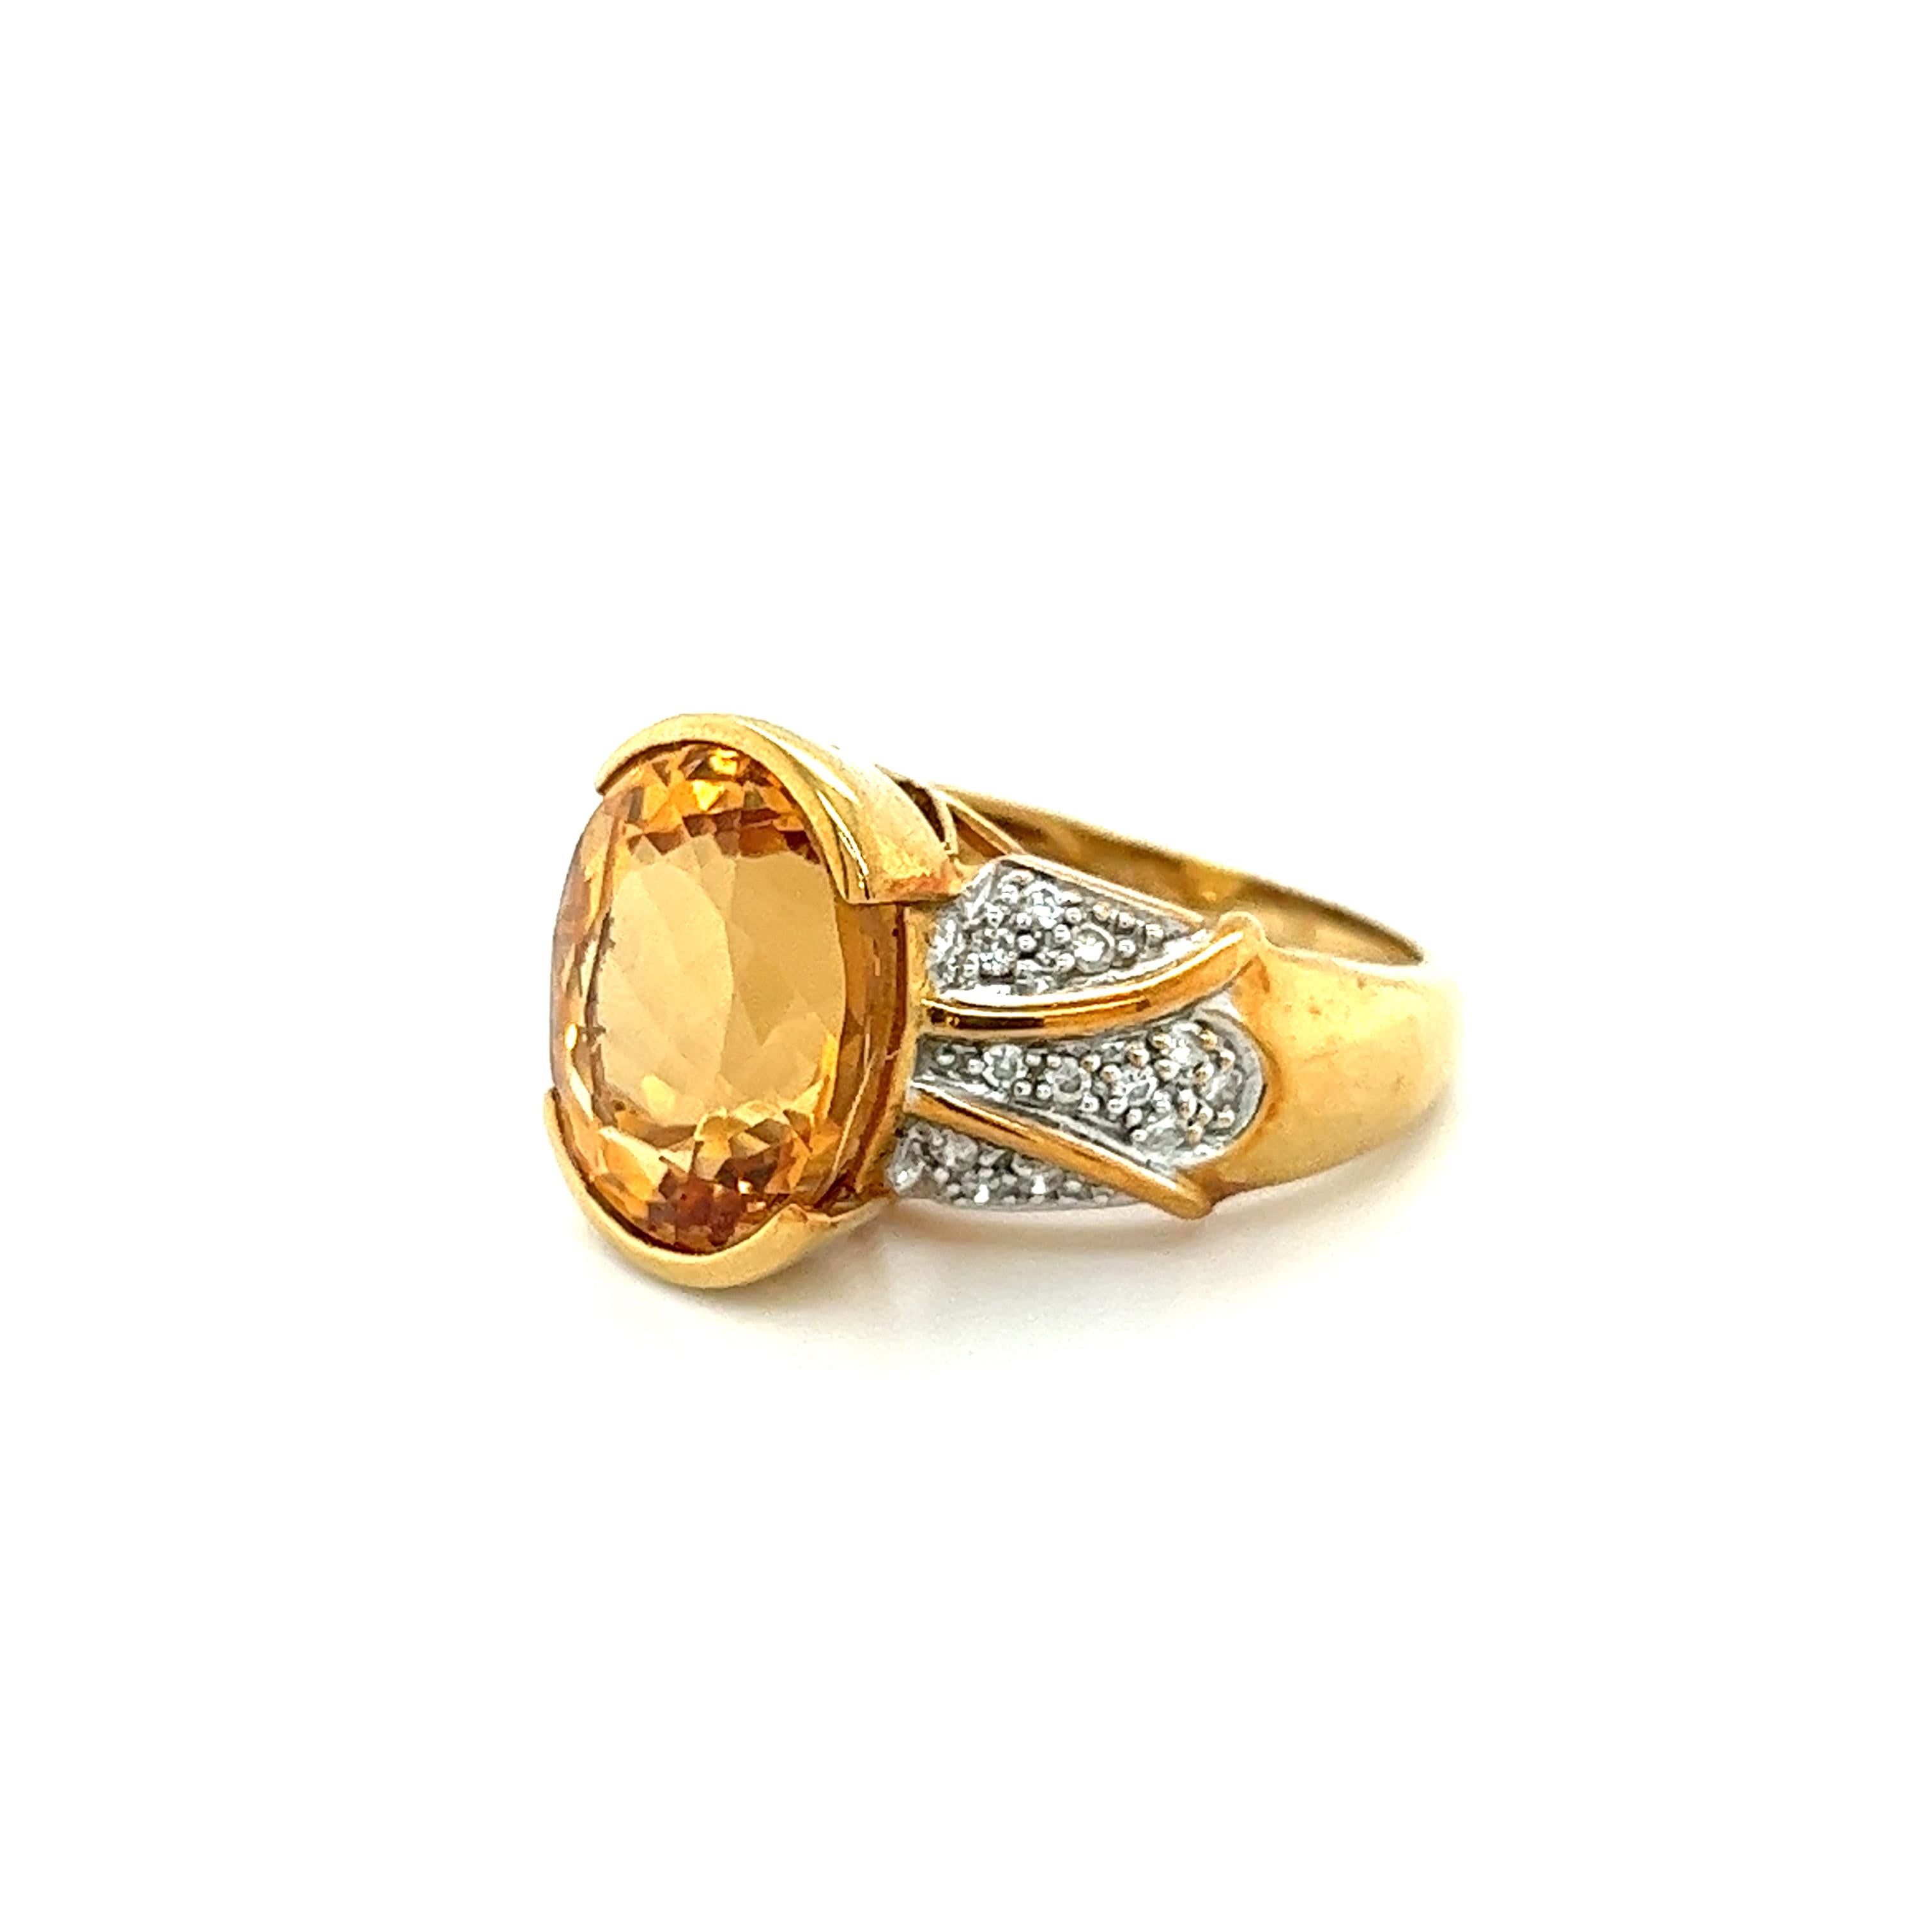 Vintage 10.5 Carat Oval Cut Precious Topaz & Curved Diamond Ring in 18k Gold  In Excellent Condition For Sale In Miami, FL